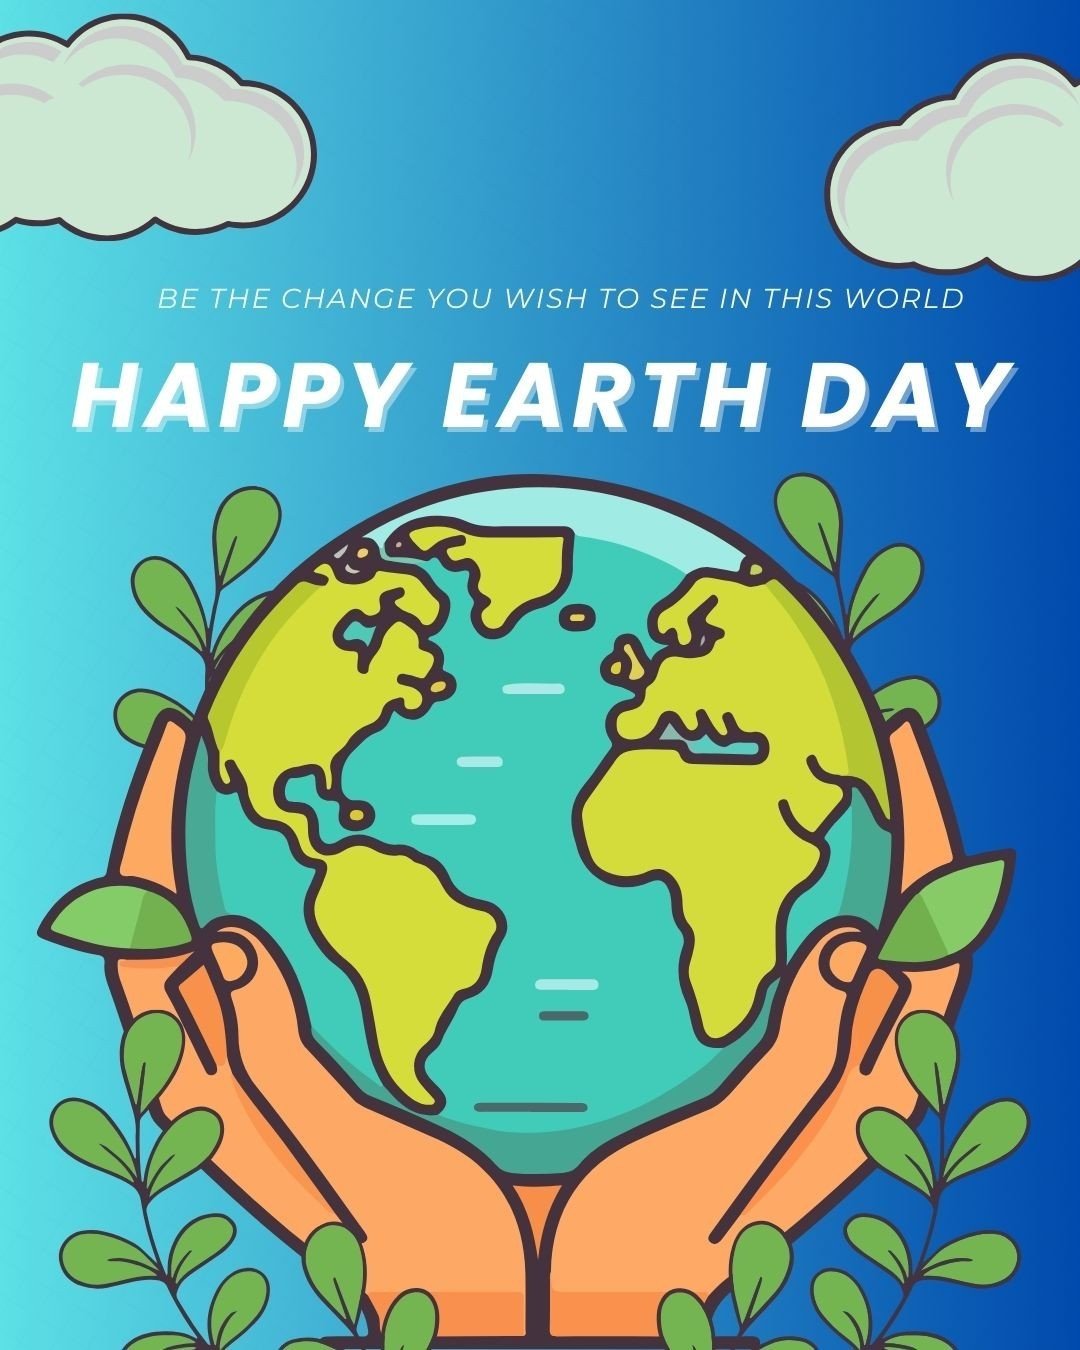 🌎🏡 Happy Earth Day from Arterra! 🌿🏠⁠
⁠
As we commemorate Earth Day, we at Arterra recognize the significance of our connection to the Earth in every aspect of real estate. Arterra, stemming from &quot;terra&quot; meaning earth, embodies our commi